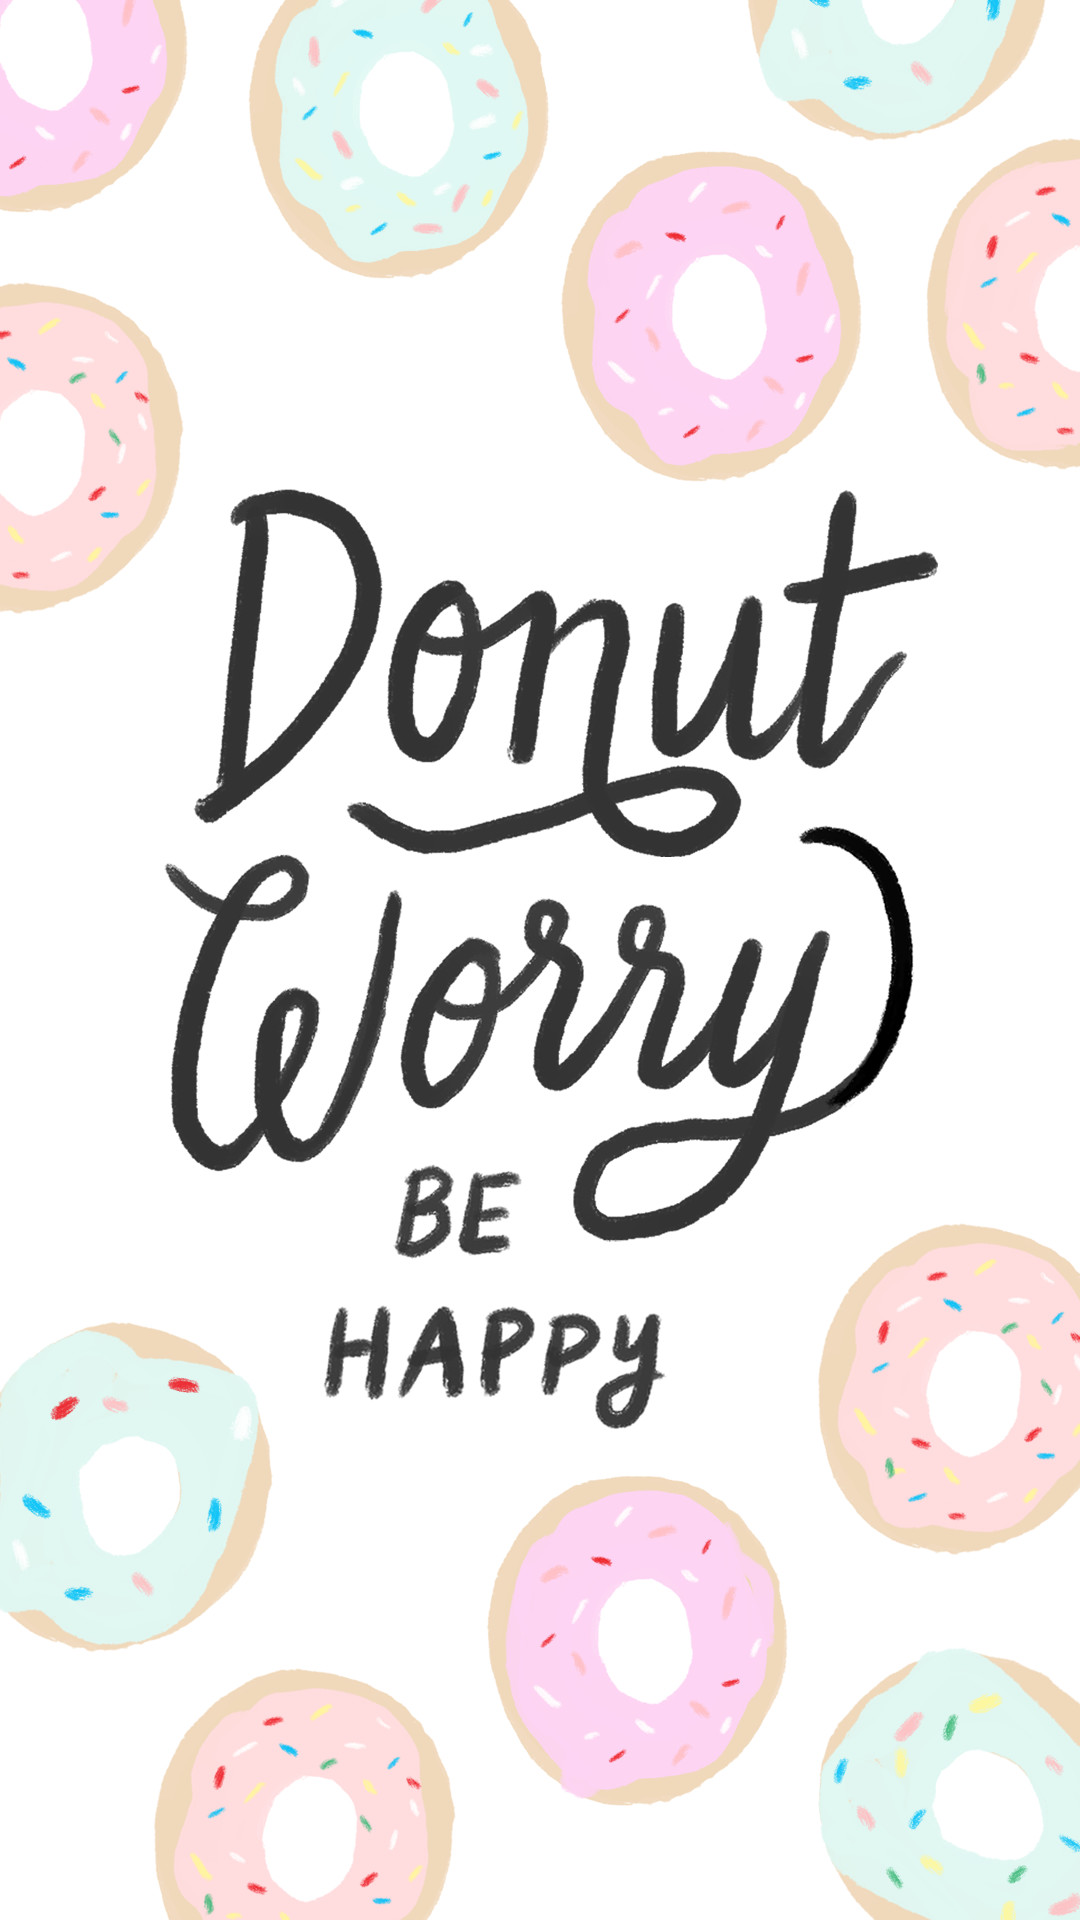 Iphone donut worry 10801920 Wallpapers Pinterest Wallpaper, Donuts and Phone